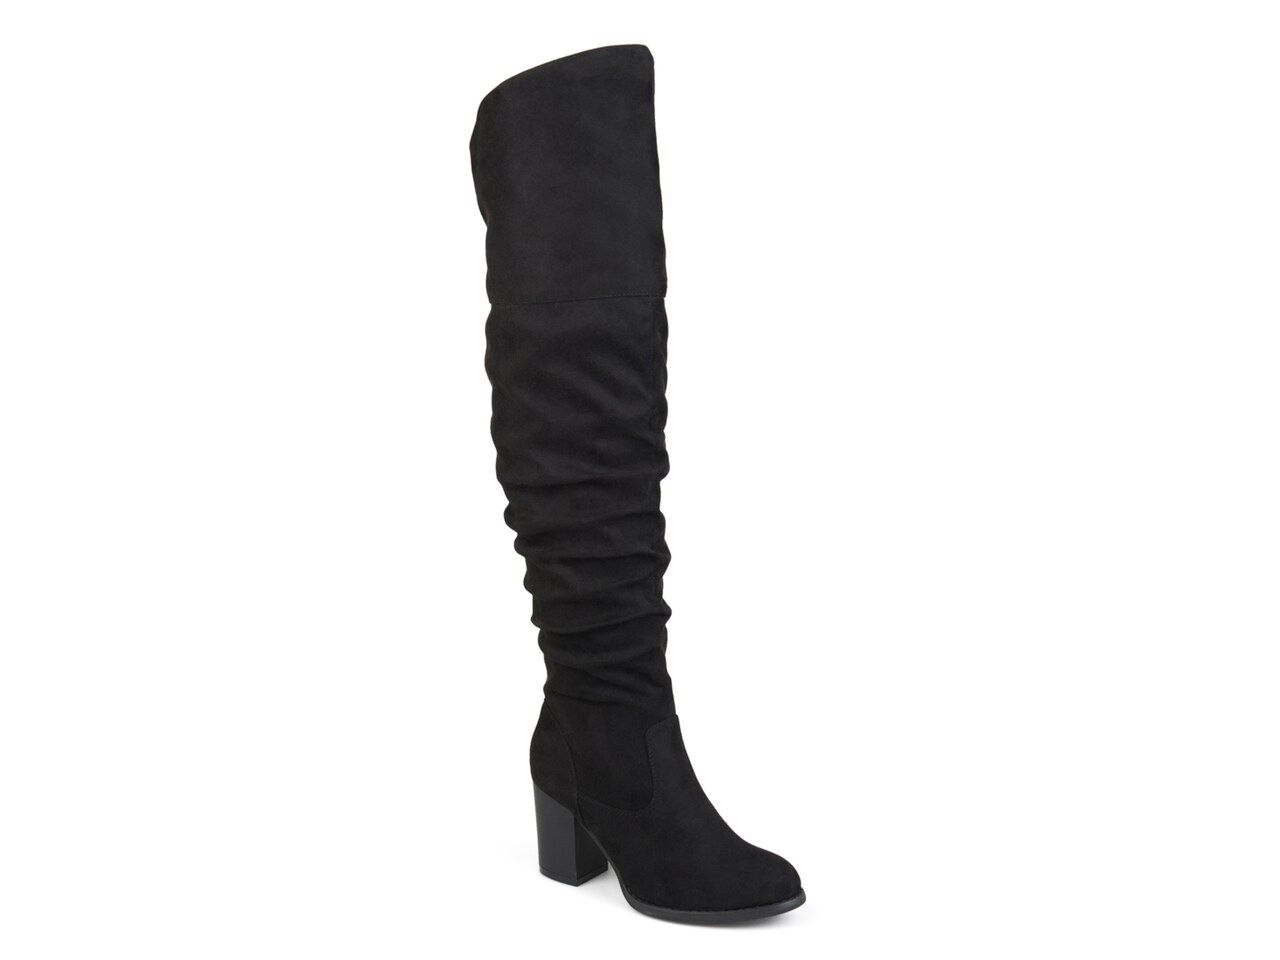 Kaison Extra Wide Calf Over the Knee Boot | DSW